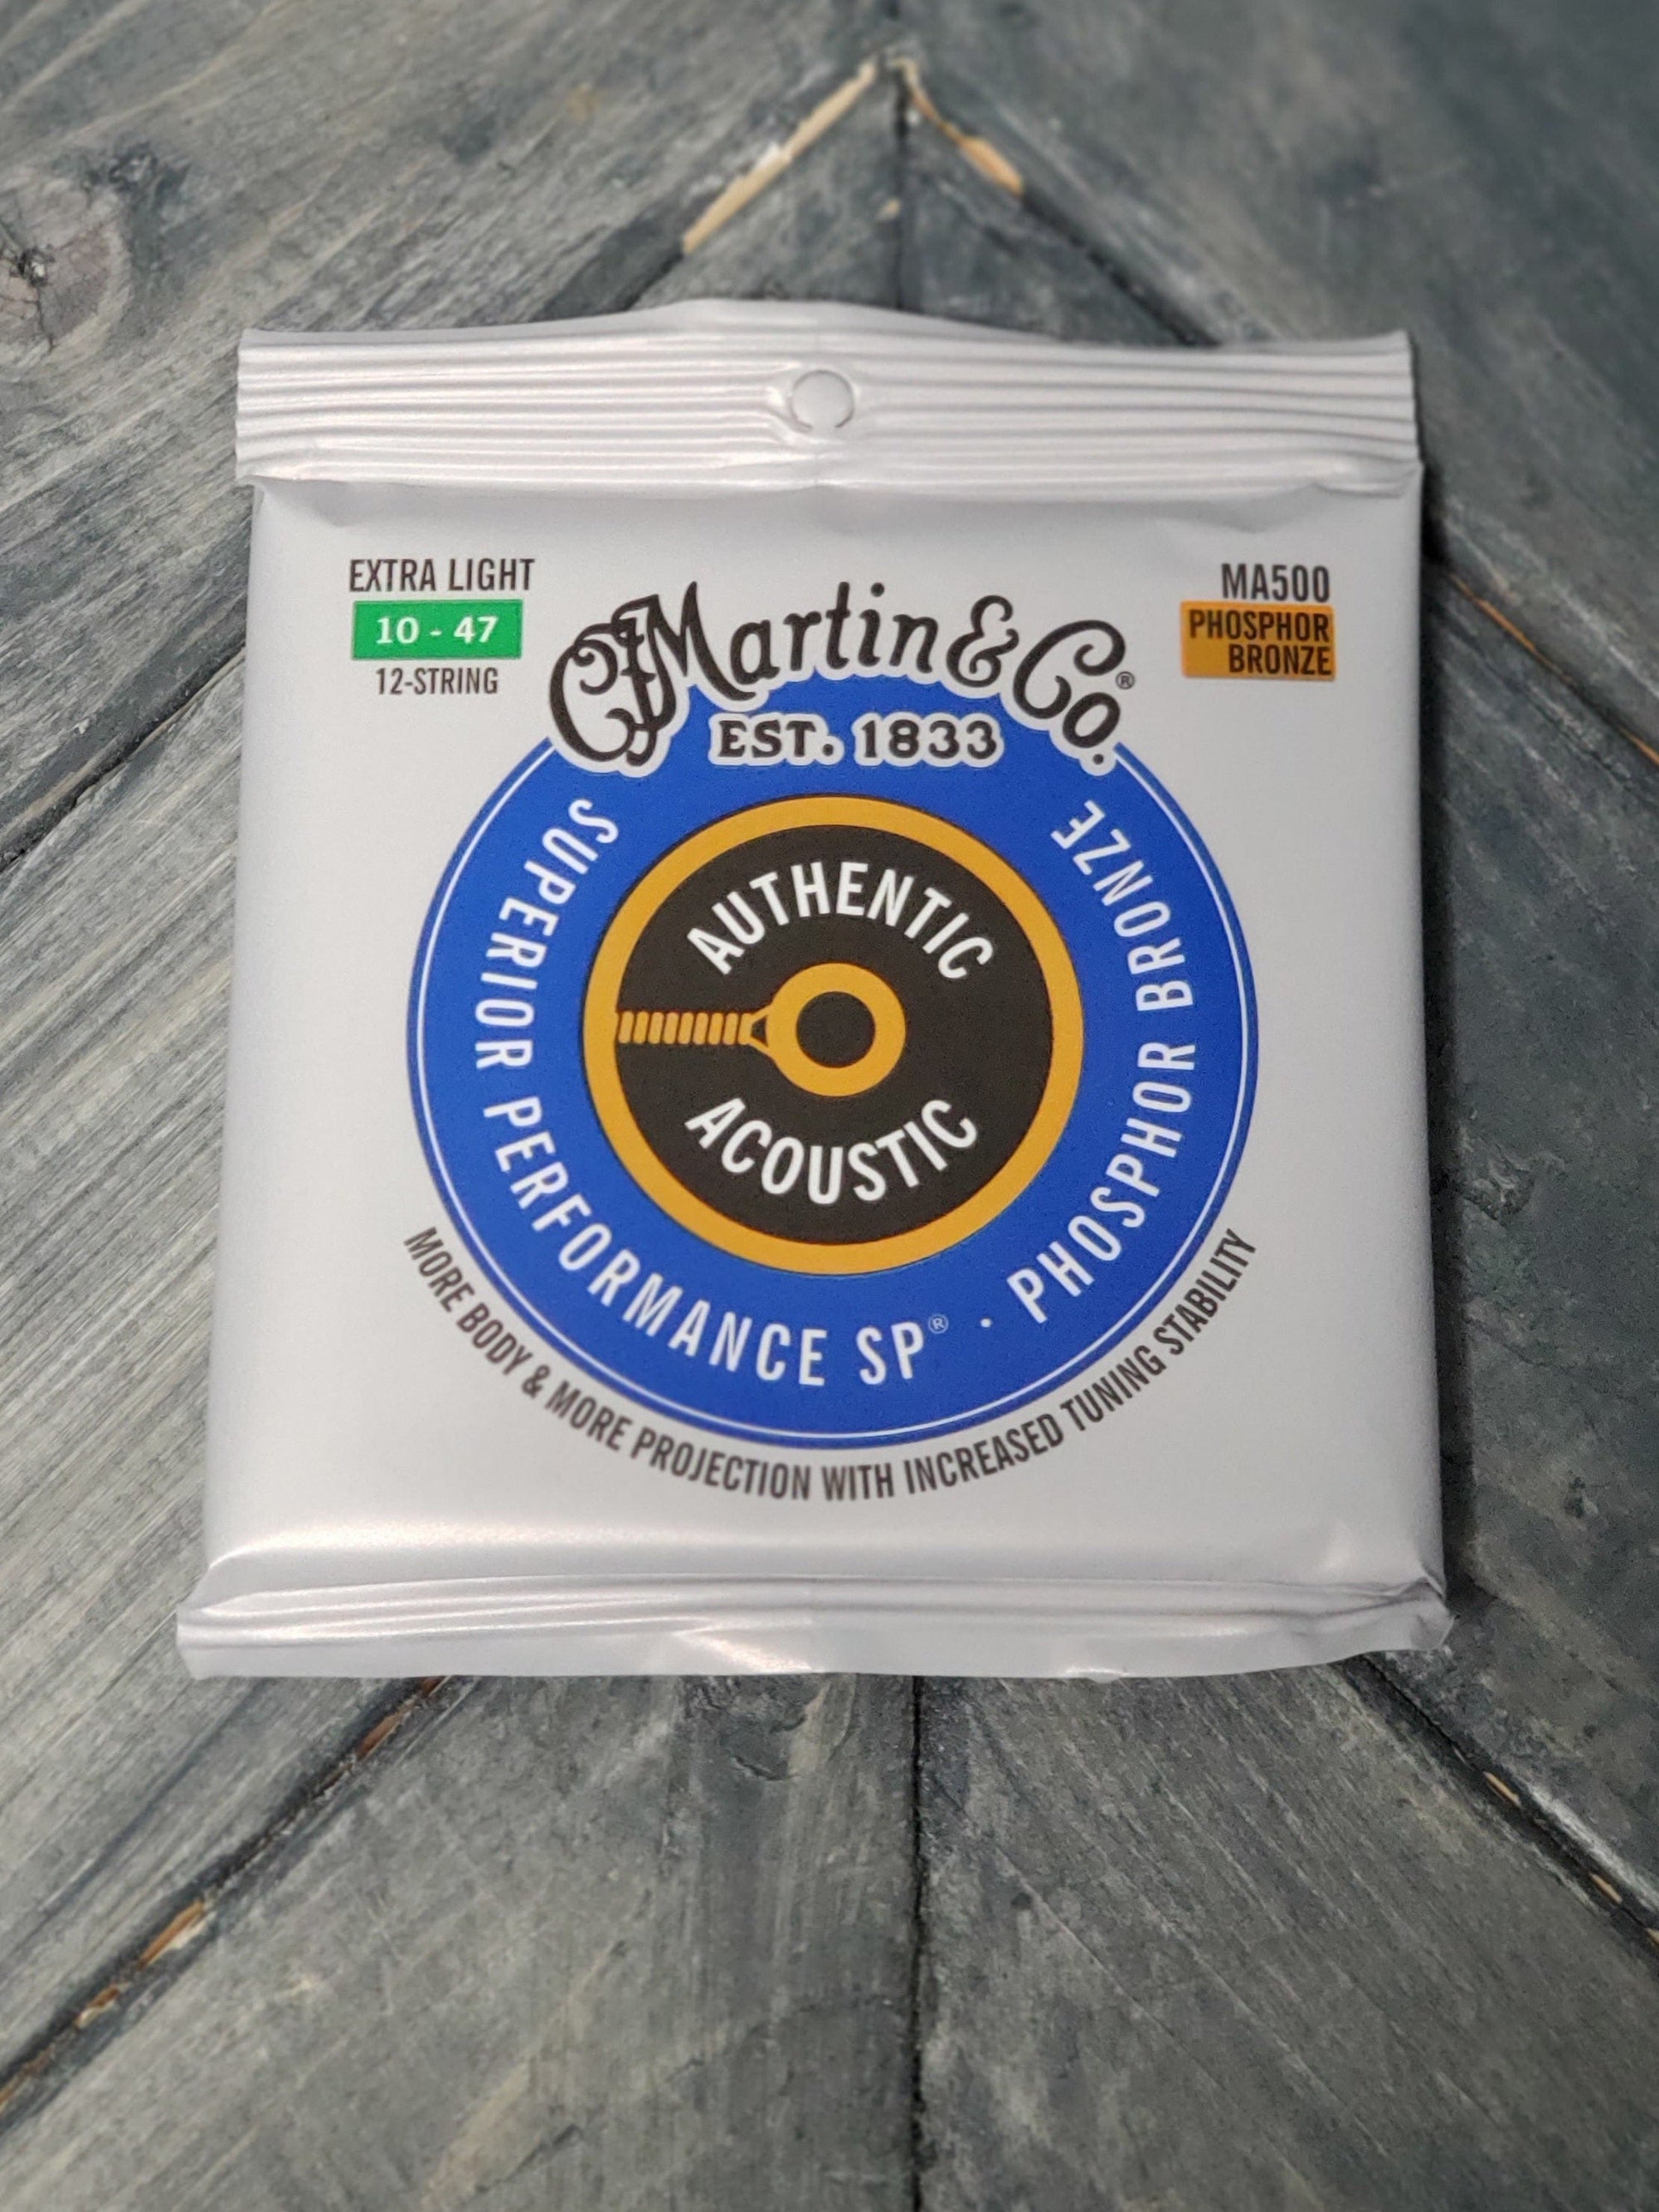 Martin MA500 Authentic Acoustic Superior Performance Phosphor Bronze 12-string Guitar Strings front of packaging